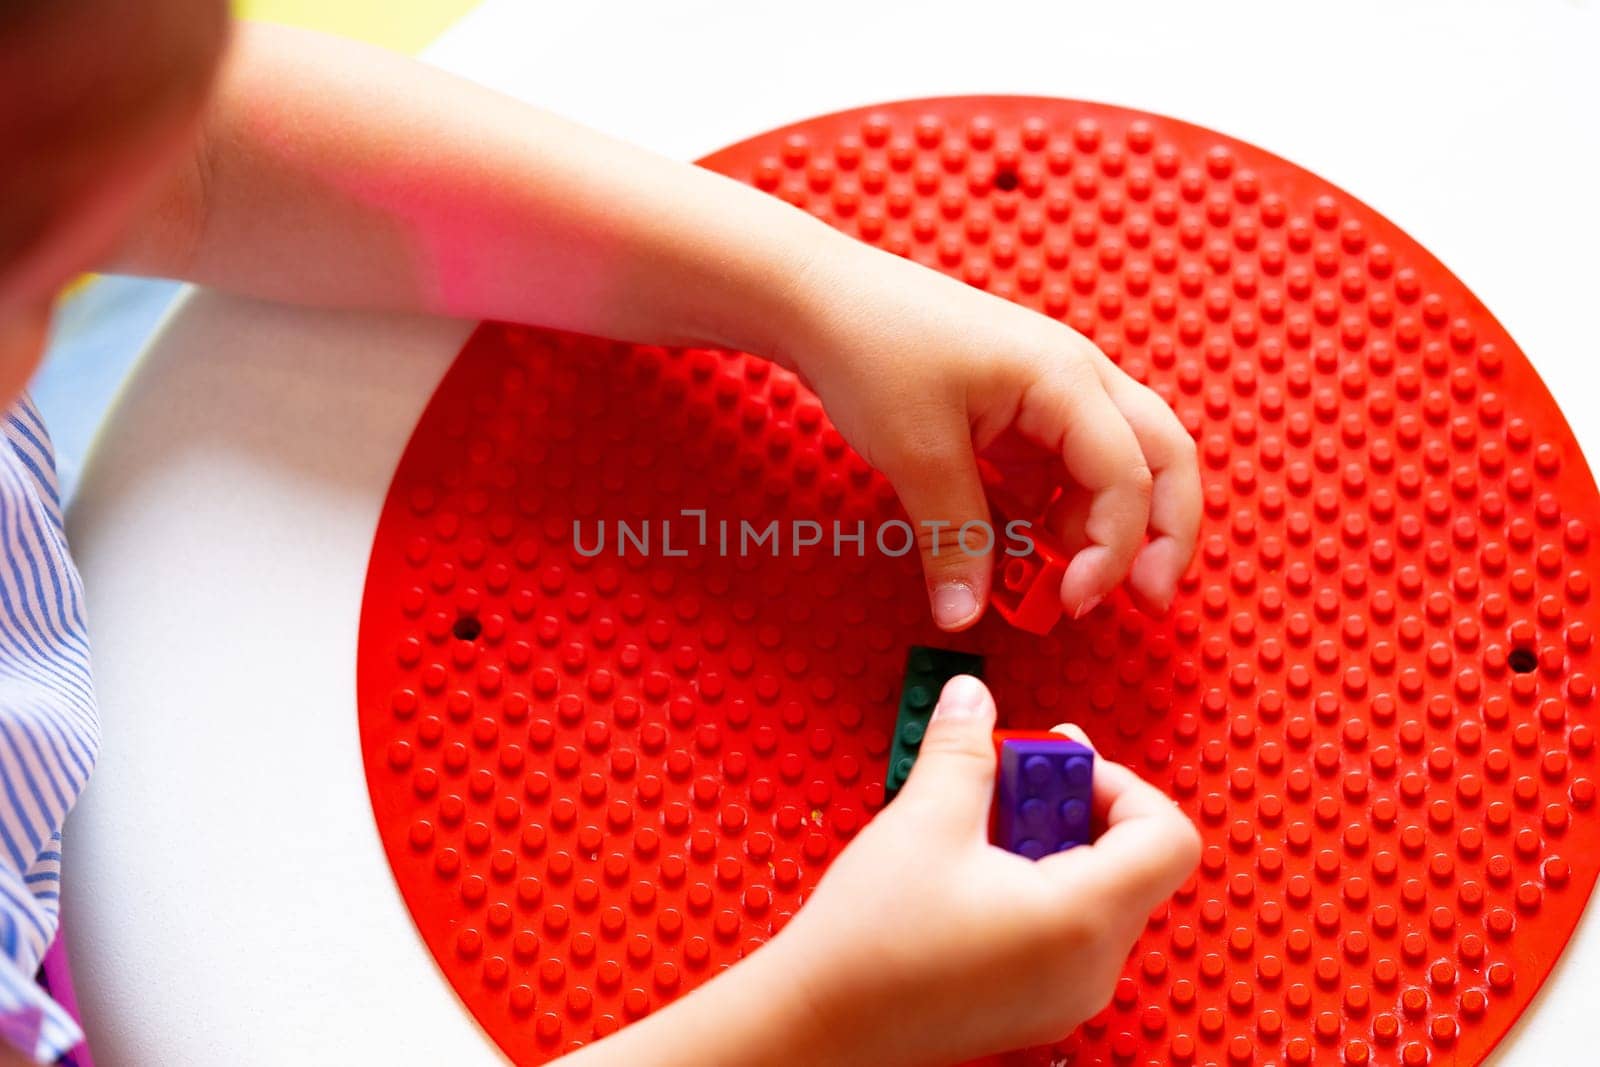 A young child is deeply focused while constructing a design with colorful plastic building blocks on a round red base. The childs hands are precisely placing a blue block to continue the pattern they have started, indicating an exercise in fine motor skills and creativity.